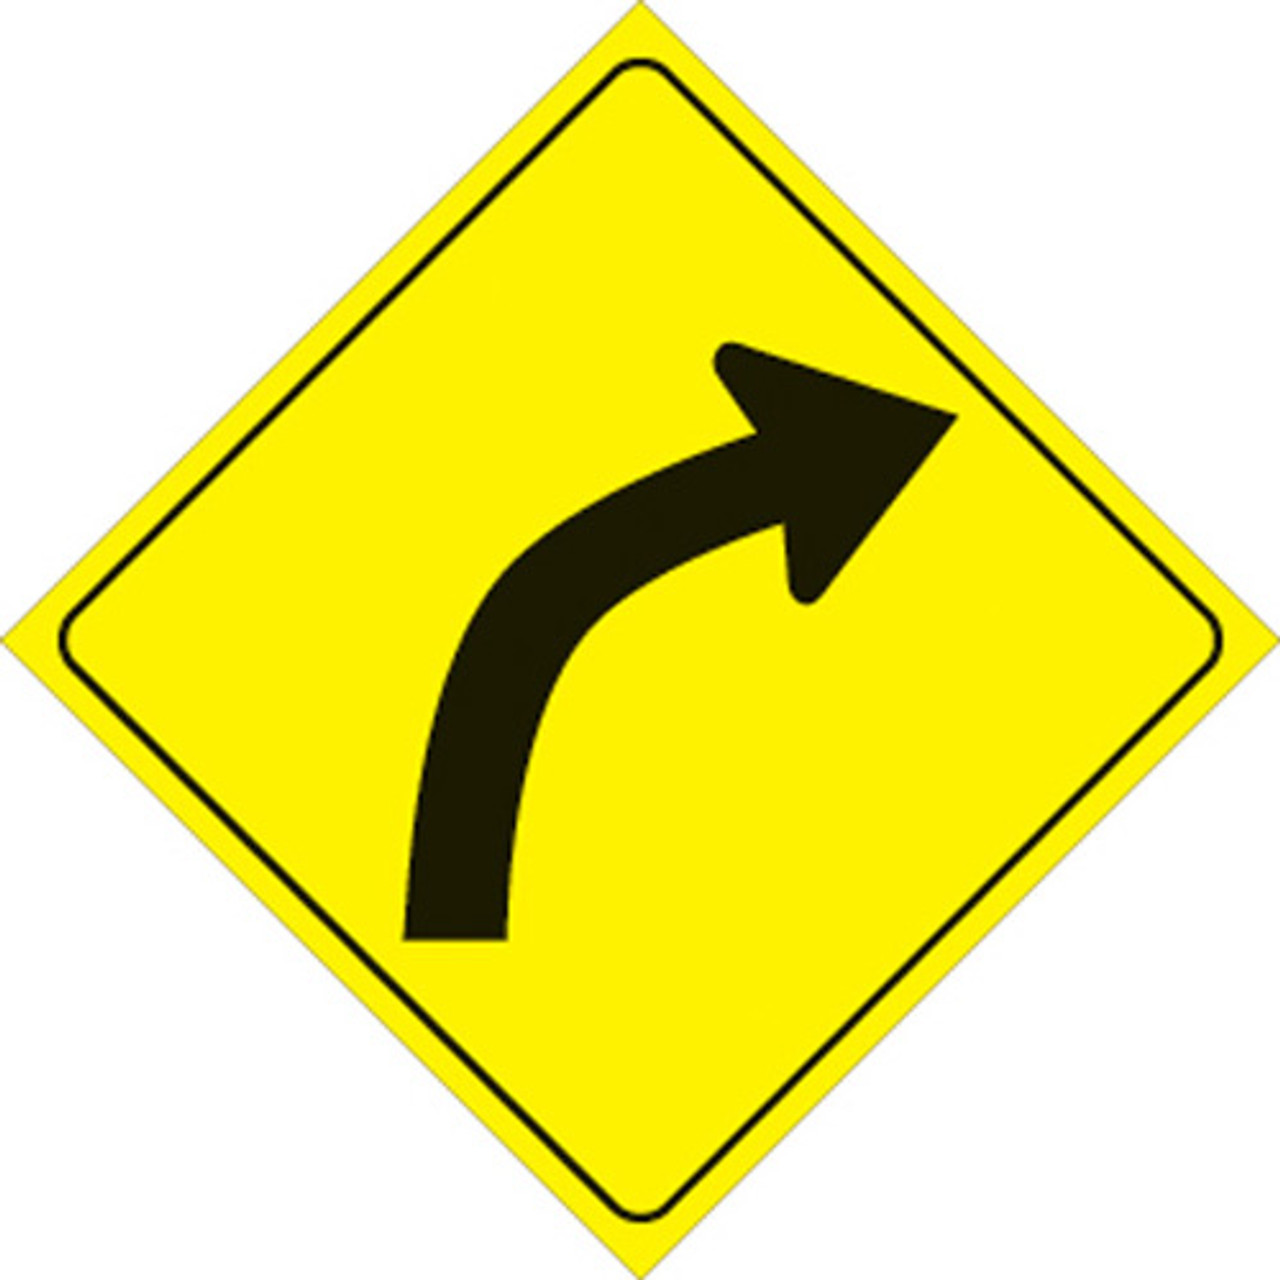 YELLOW PLASTIC REFLECTIVE SIGN 12" - RIGHT CURVE (406 CUR YR)